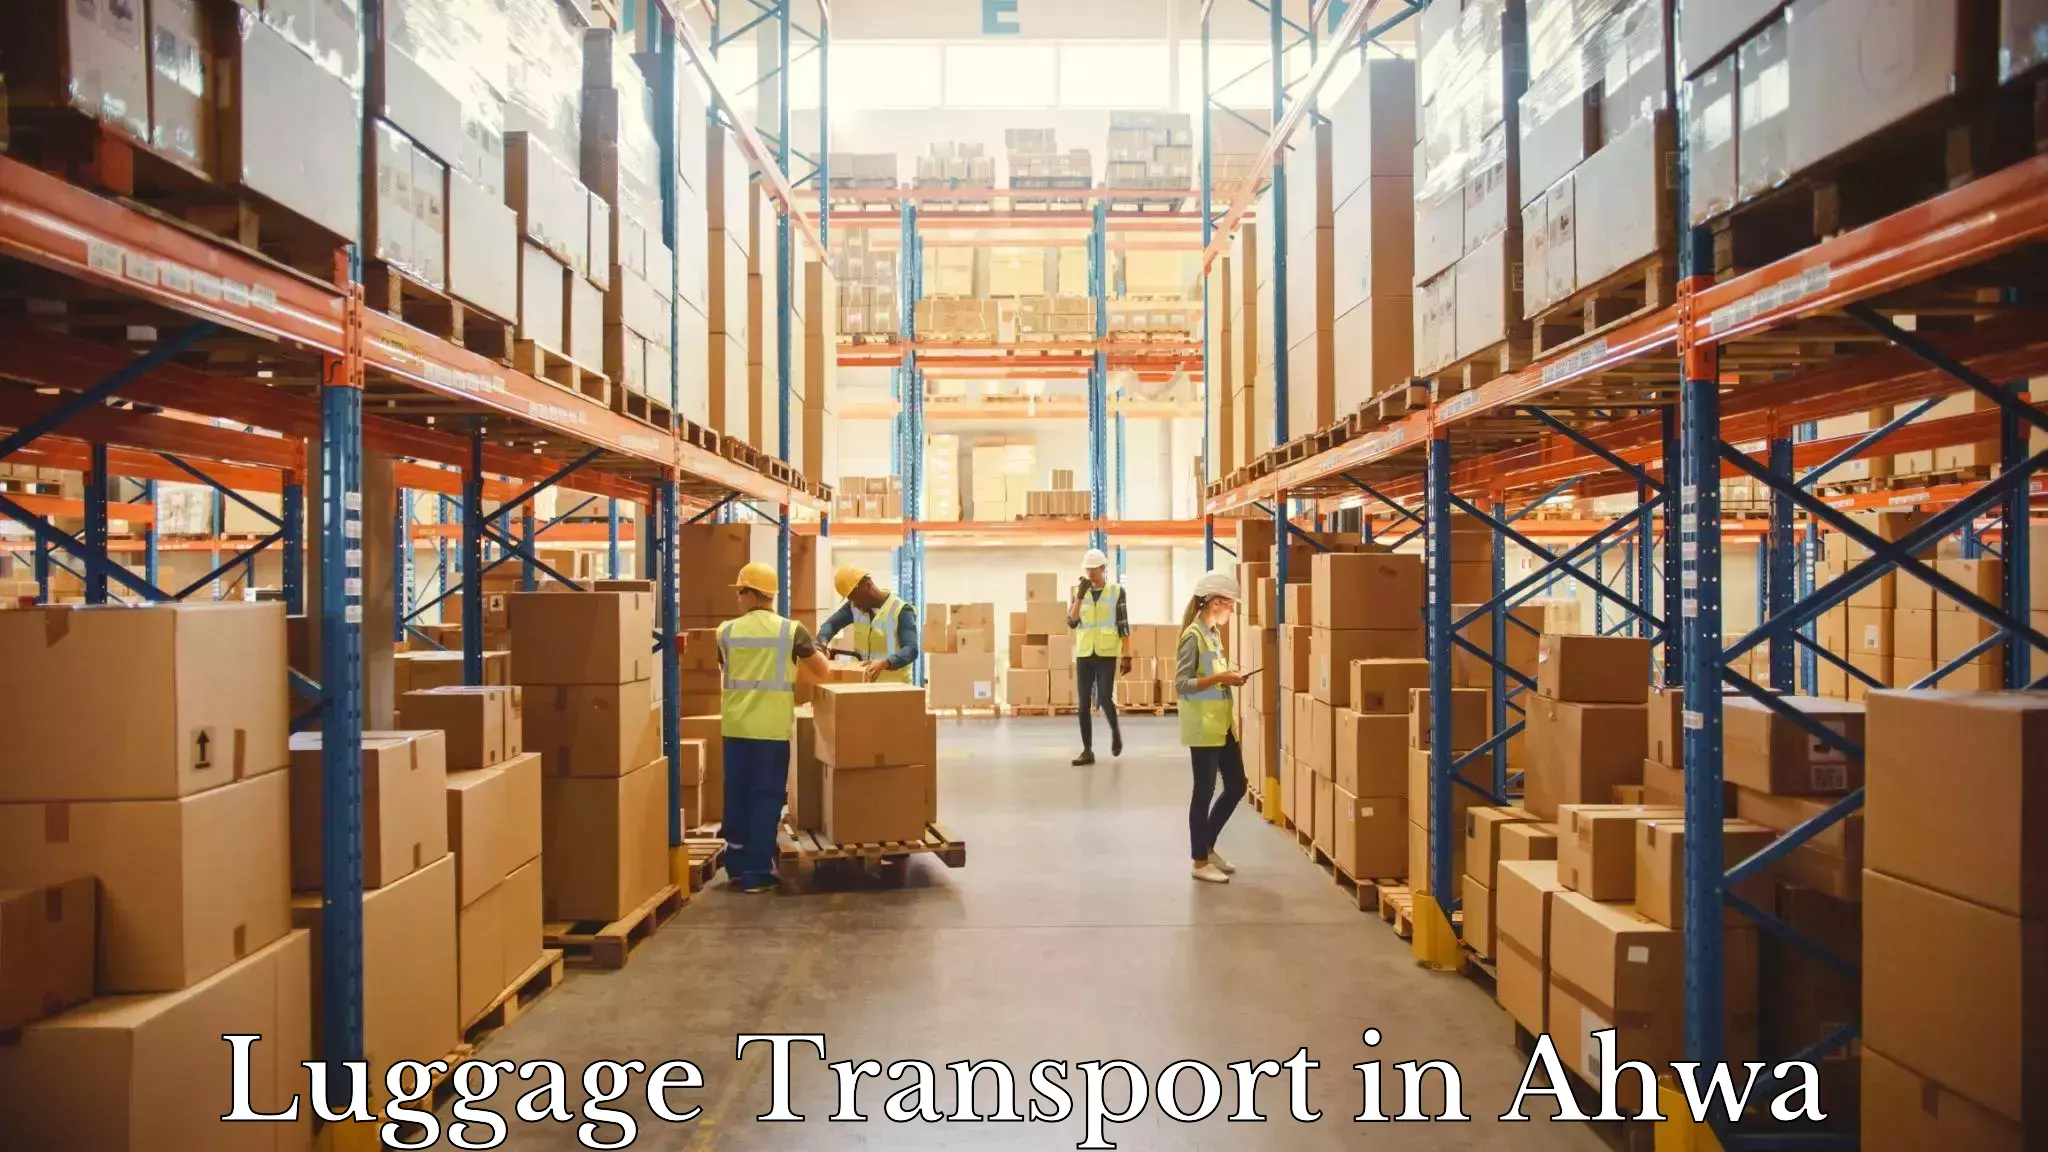 Baggage transport network in Ahwa